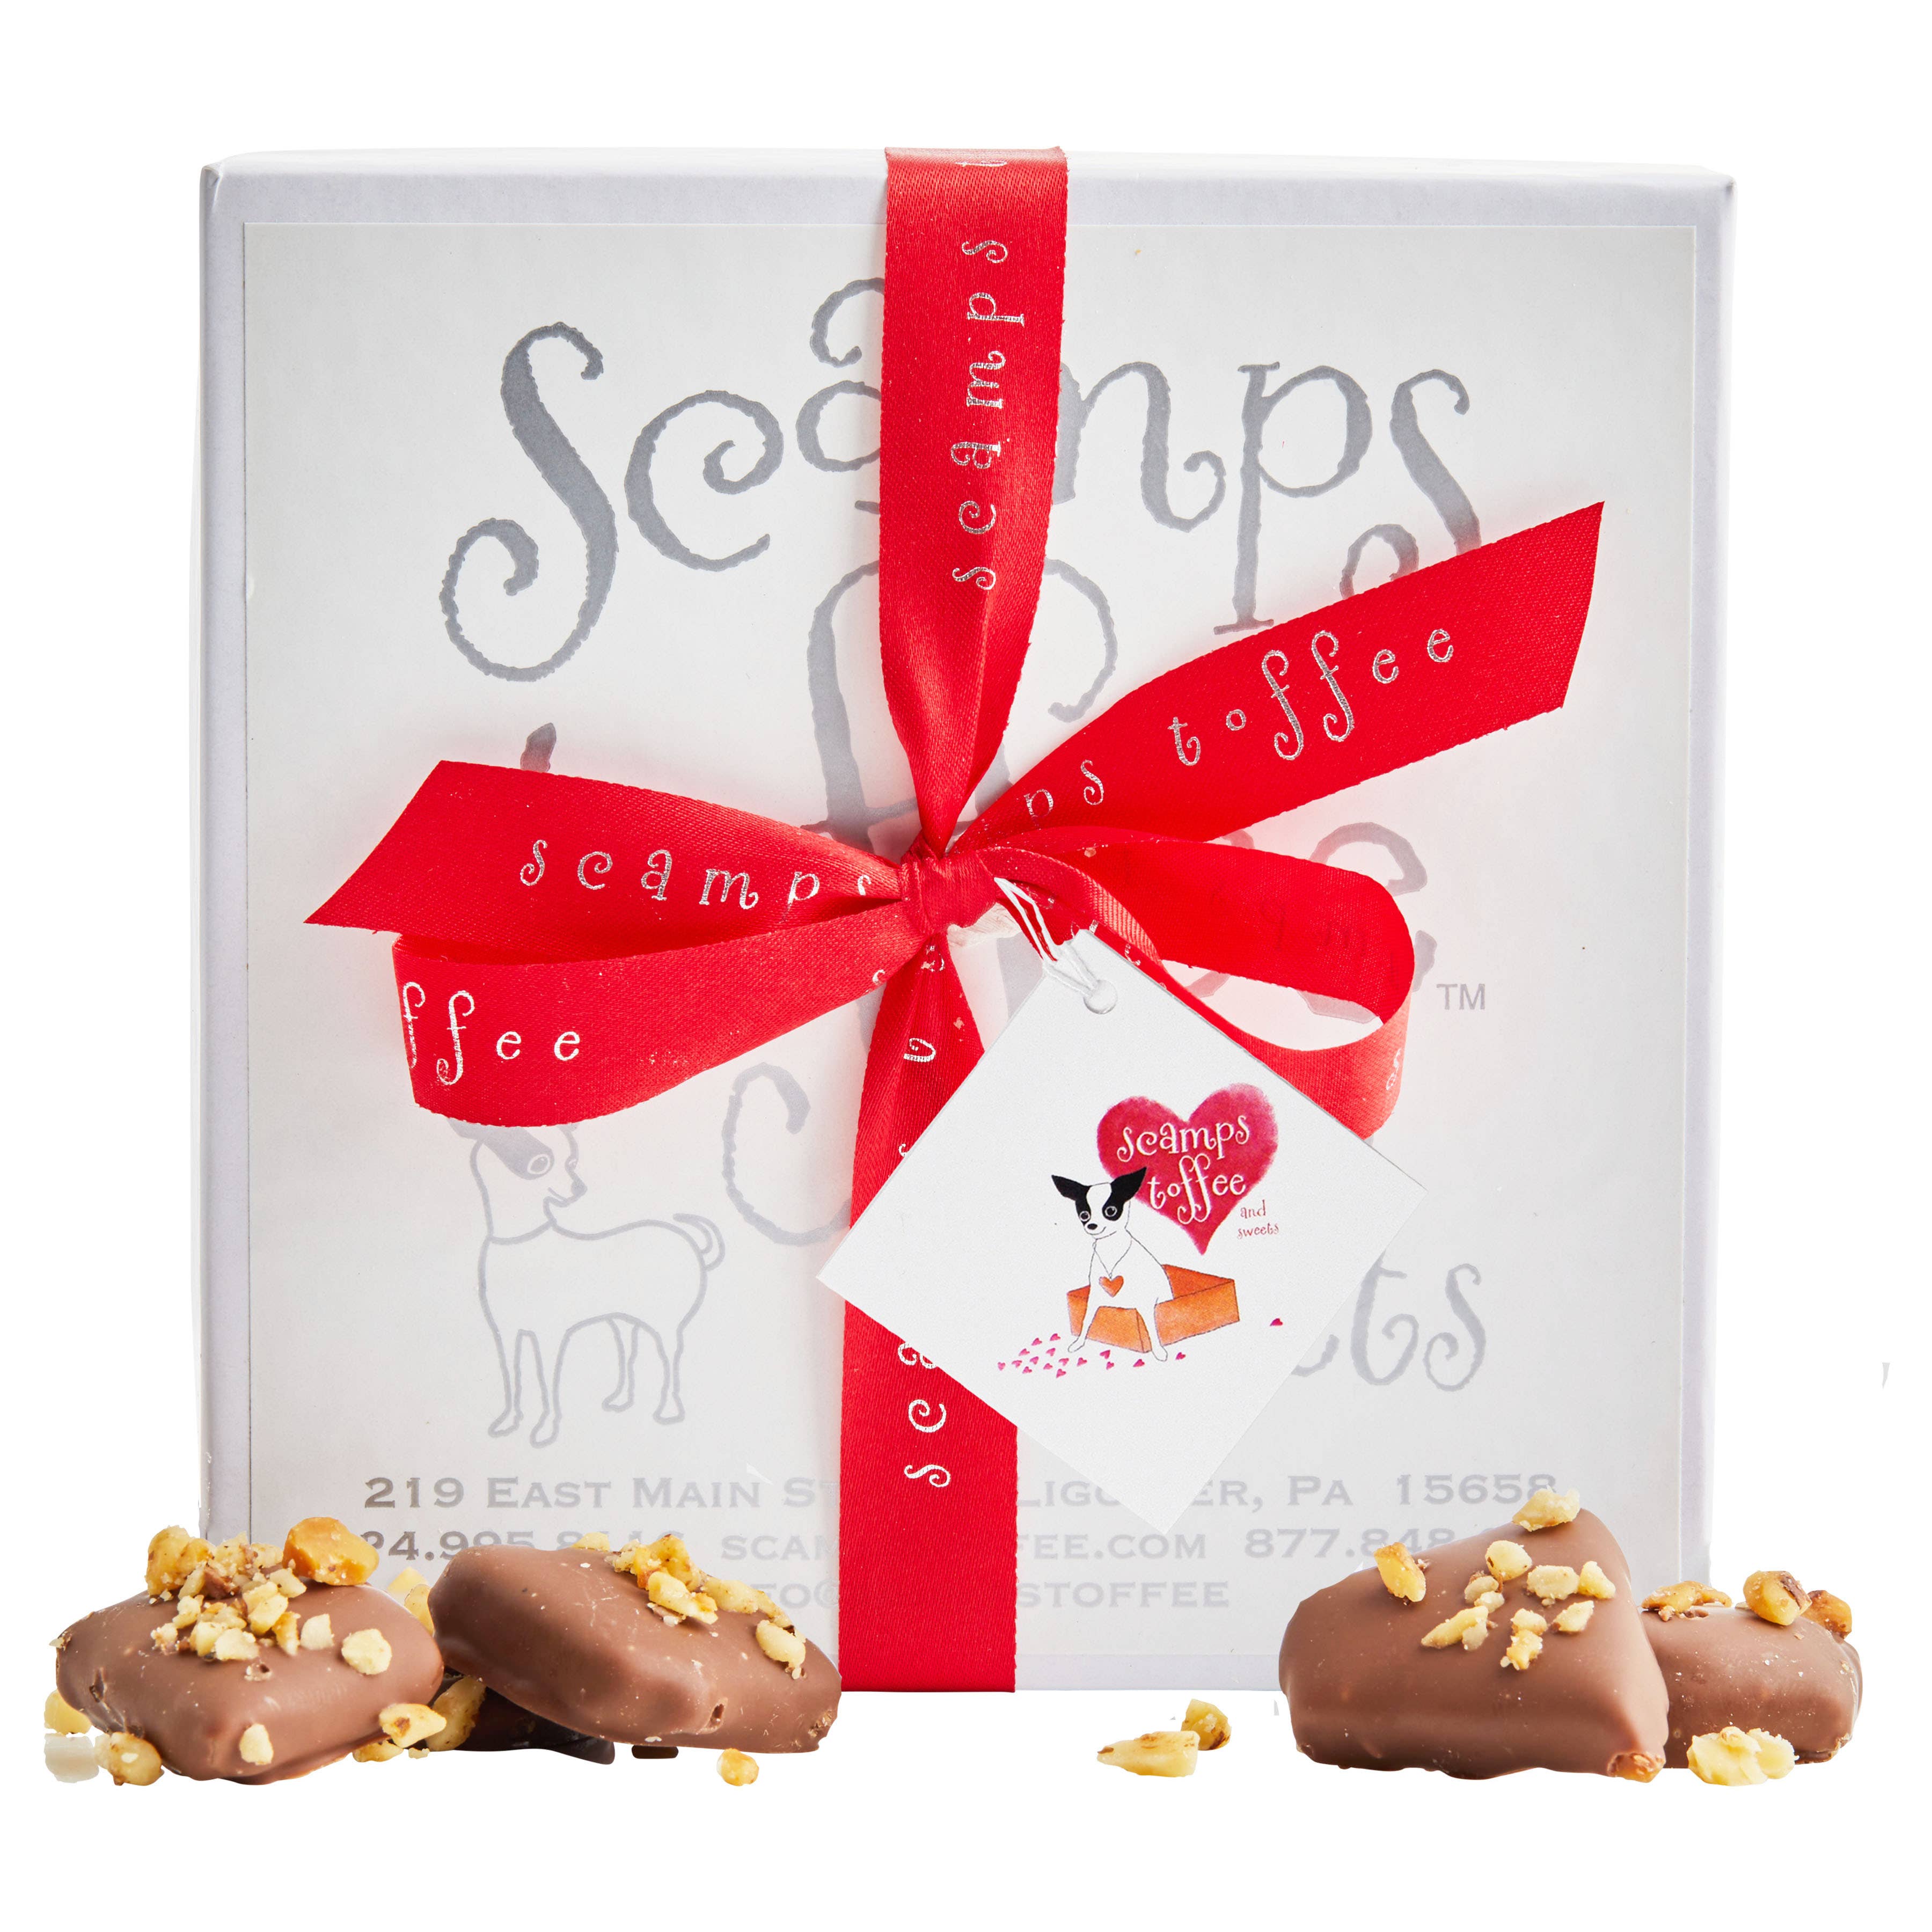 Scamps Toffee - 4oz Milk Chocolate Toffee Box - Valentine's Day with Tag